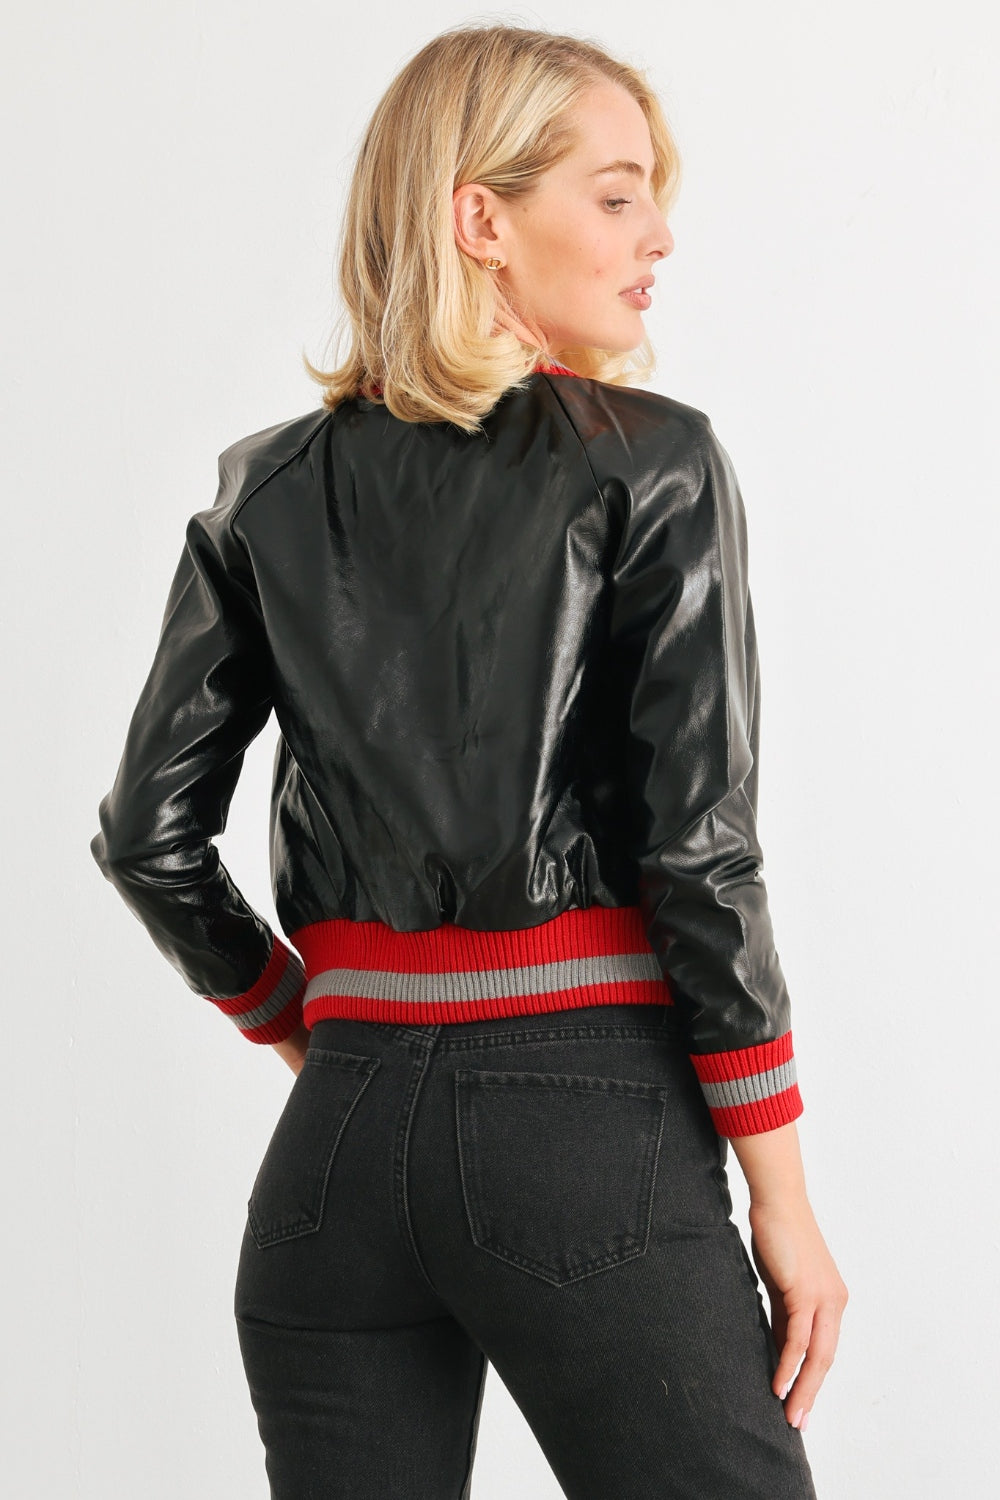 Comme PU Leather Baseball Collar Long Sleeve Jacket Casual Chic Boutique